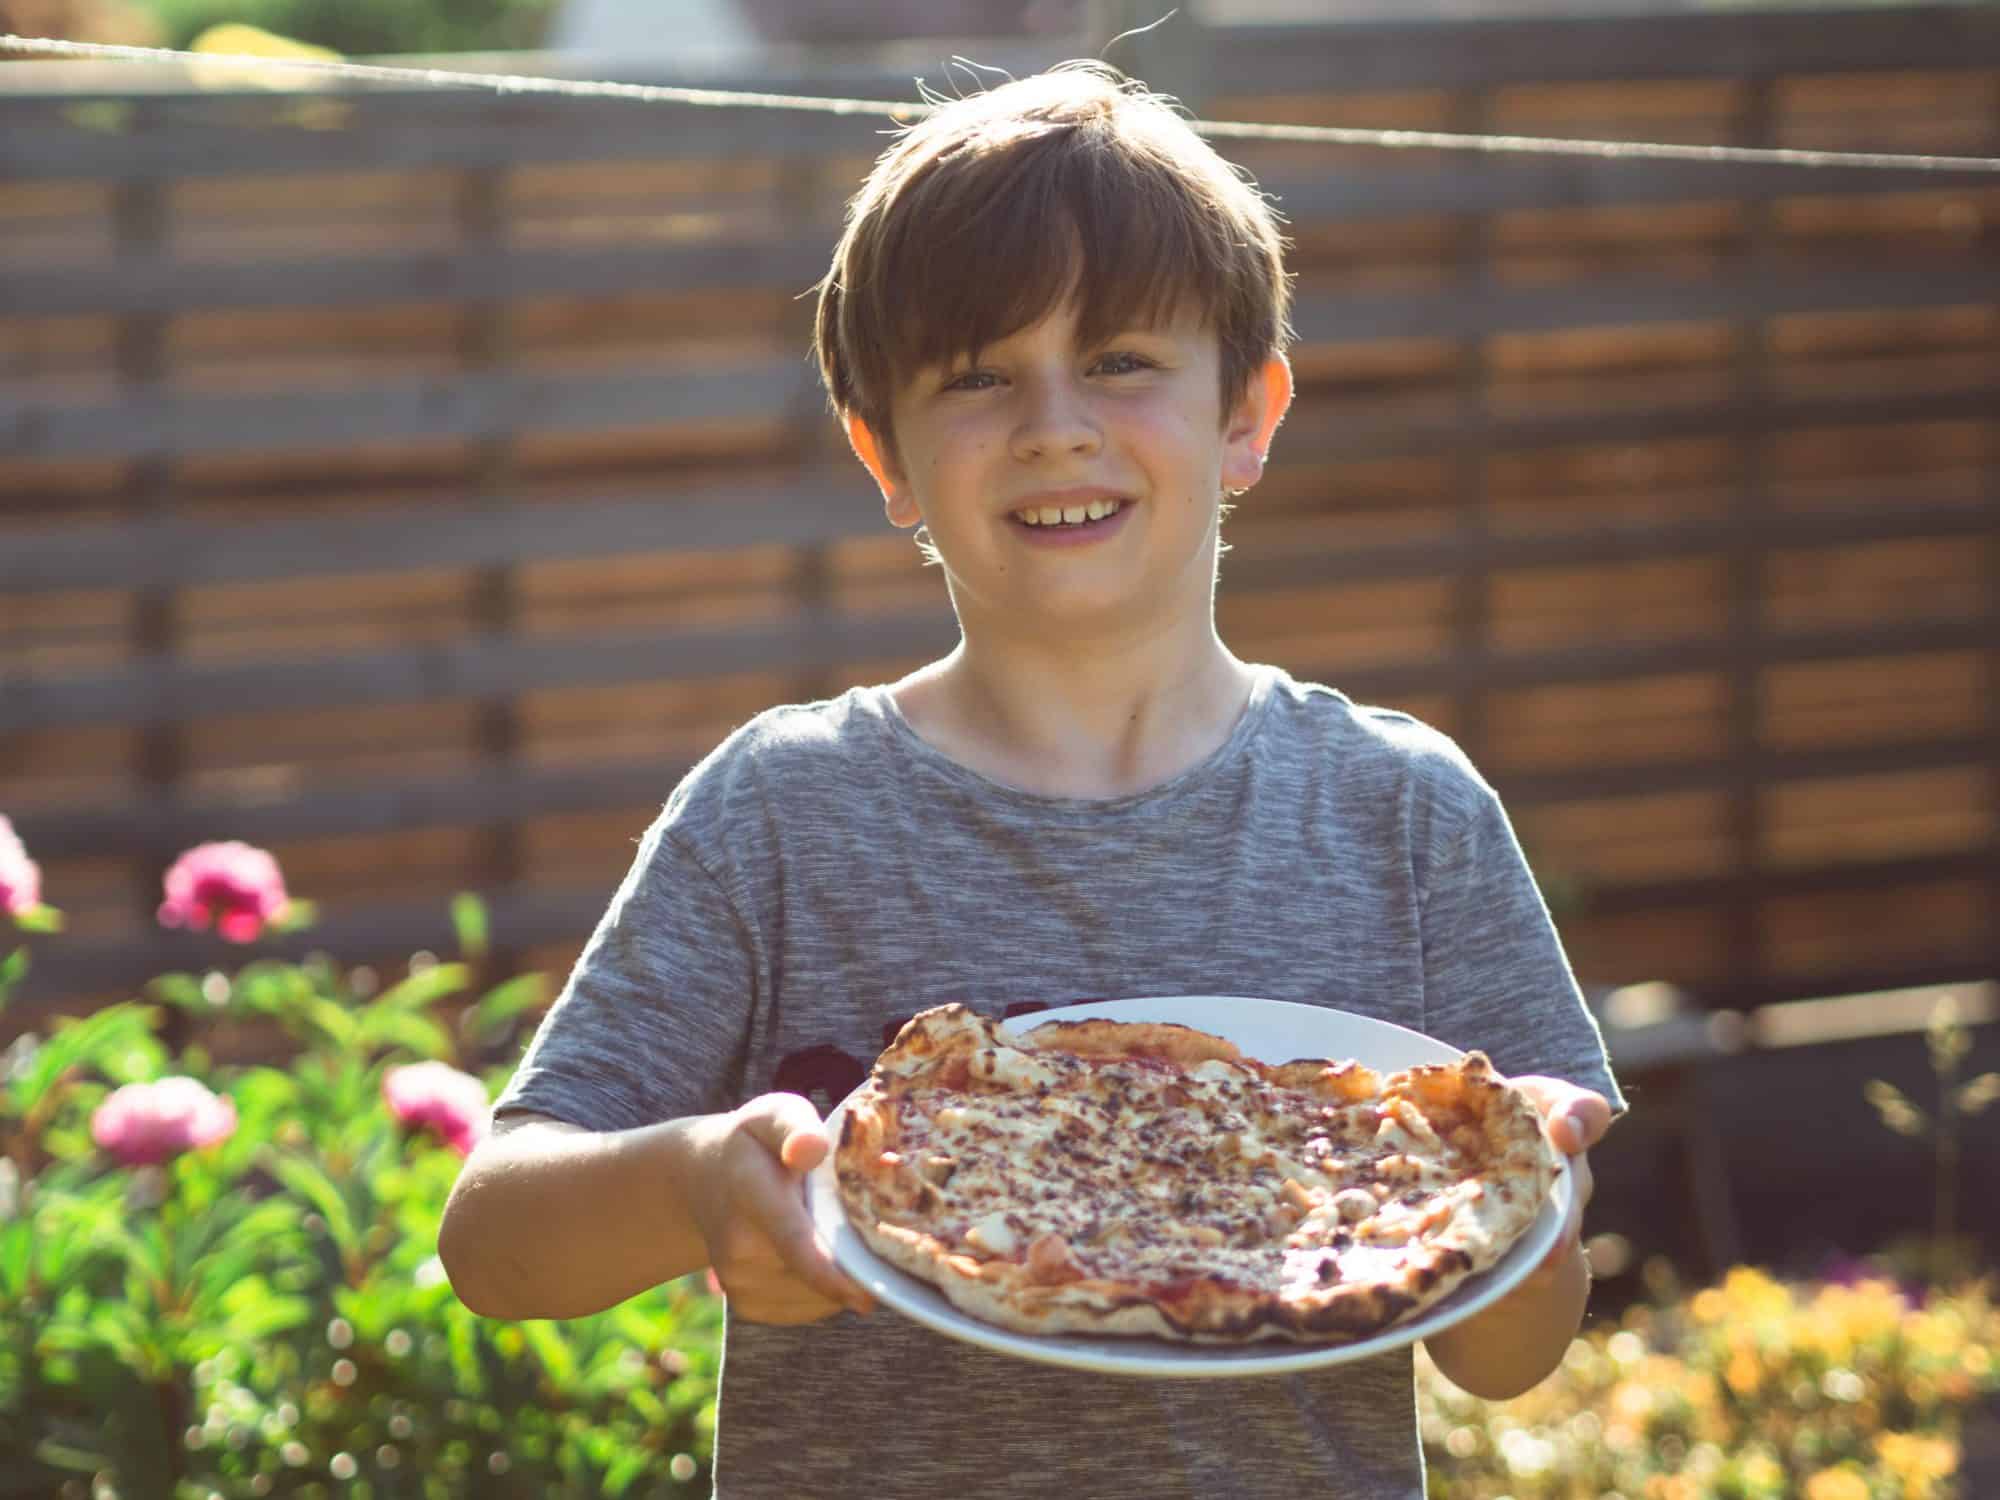 Outdoor Pizza Night: Cooking Pizza Outdoors with Kids